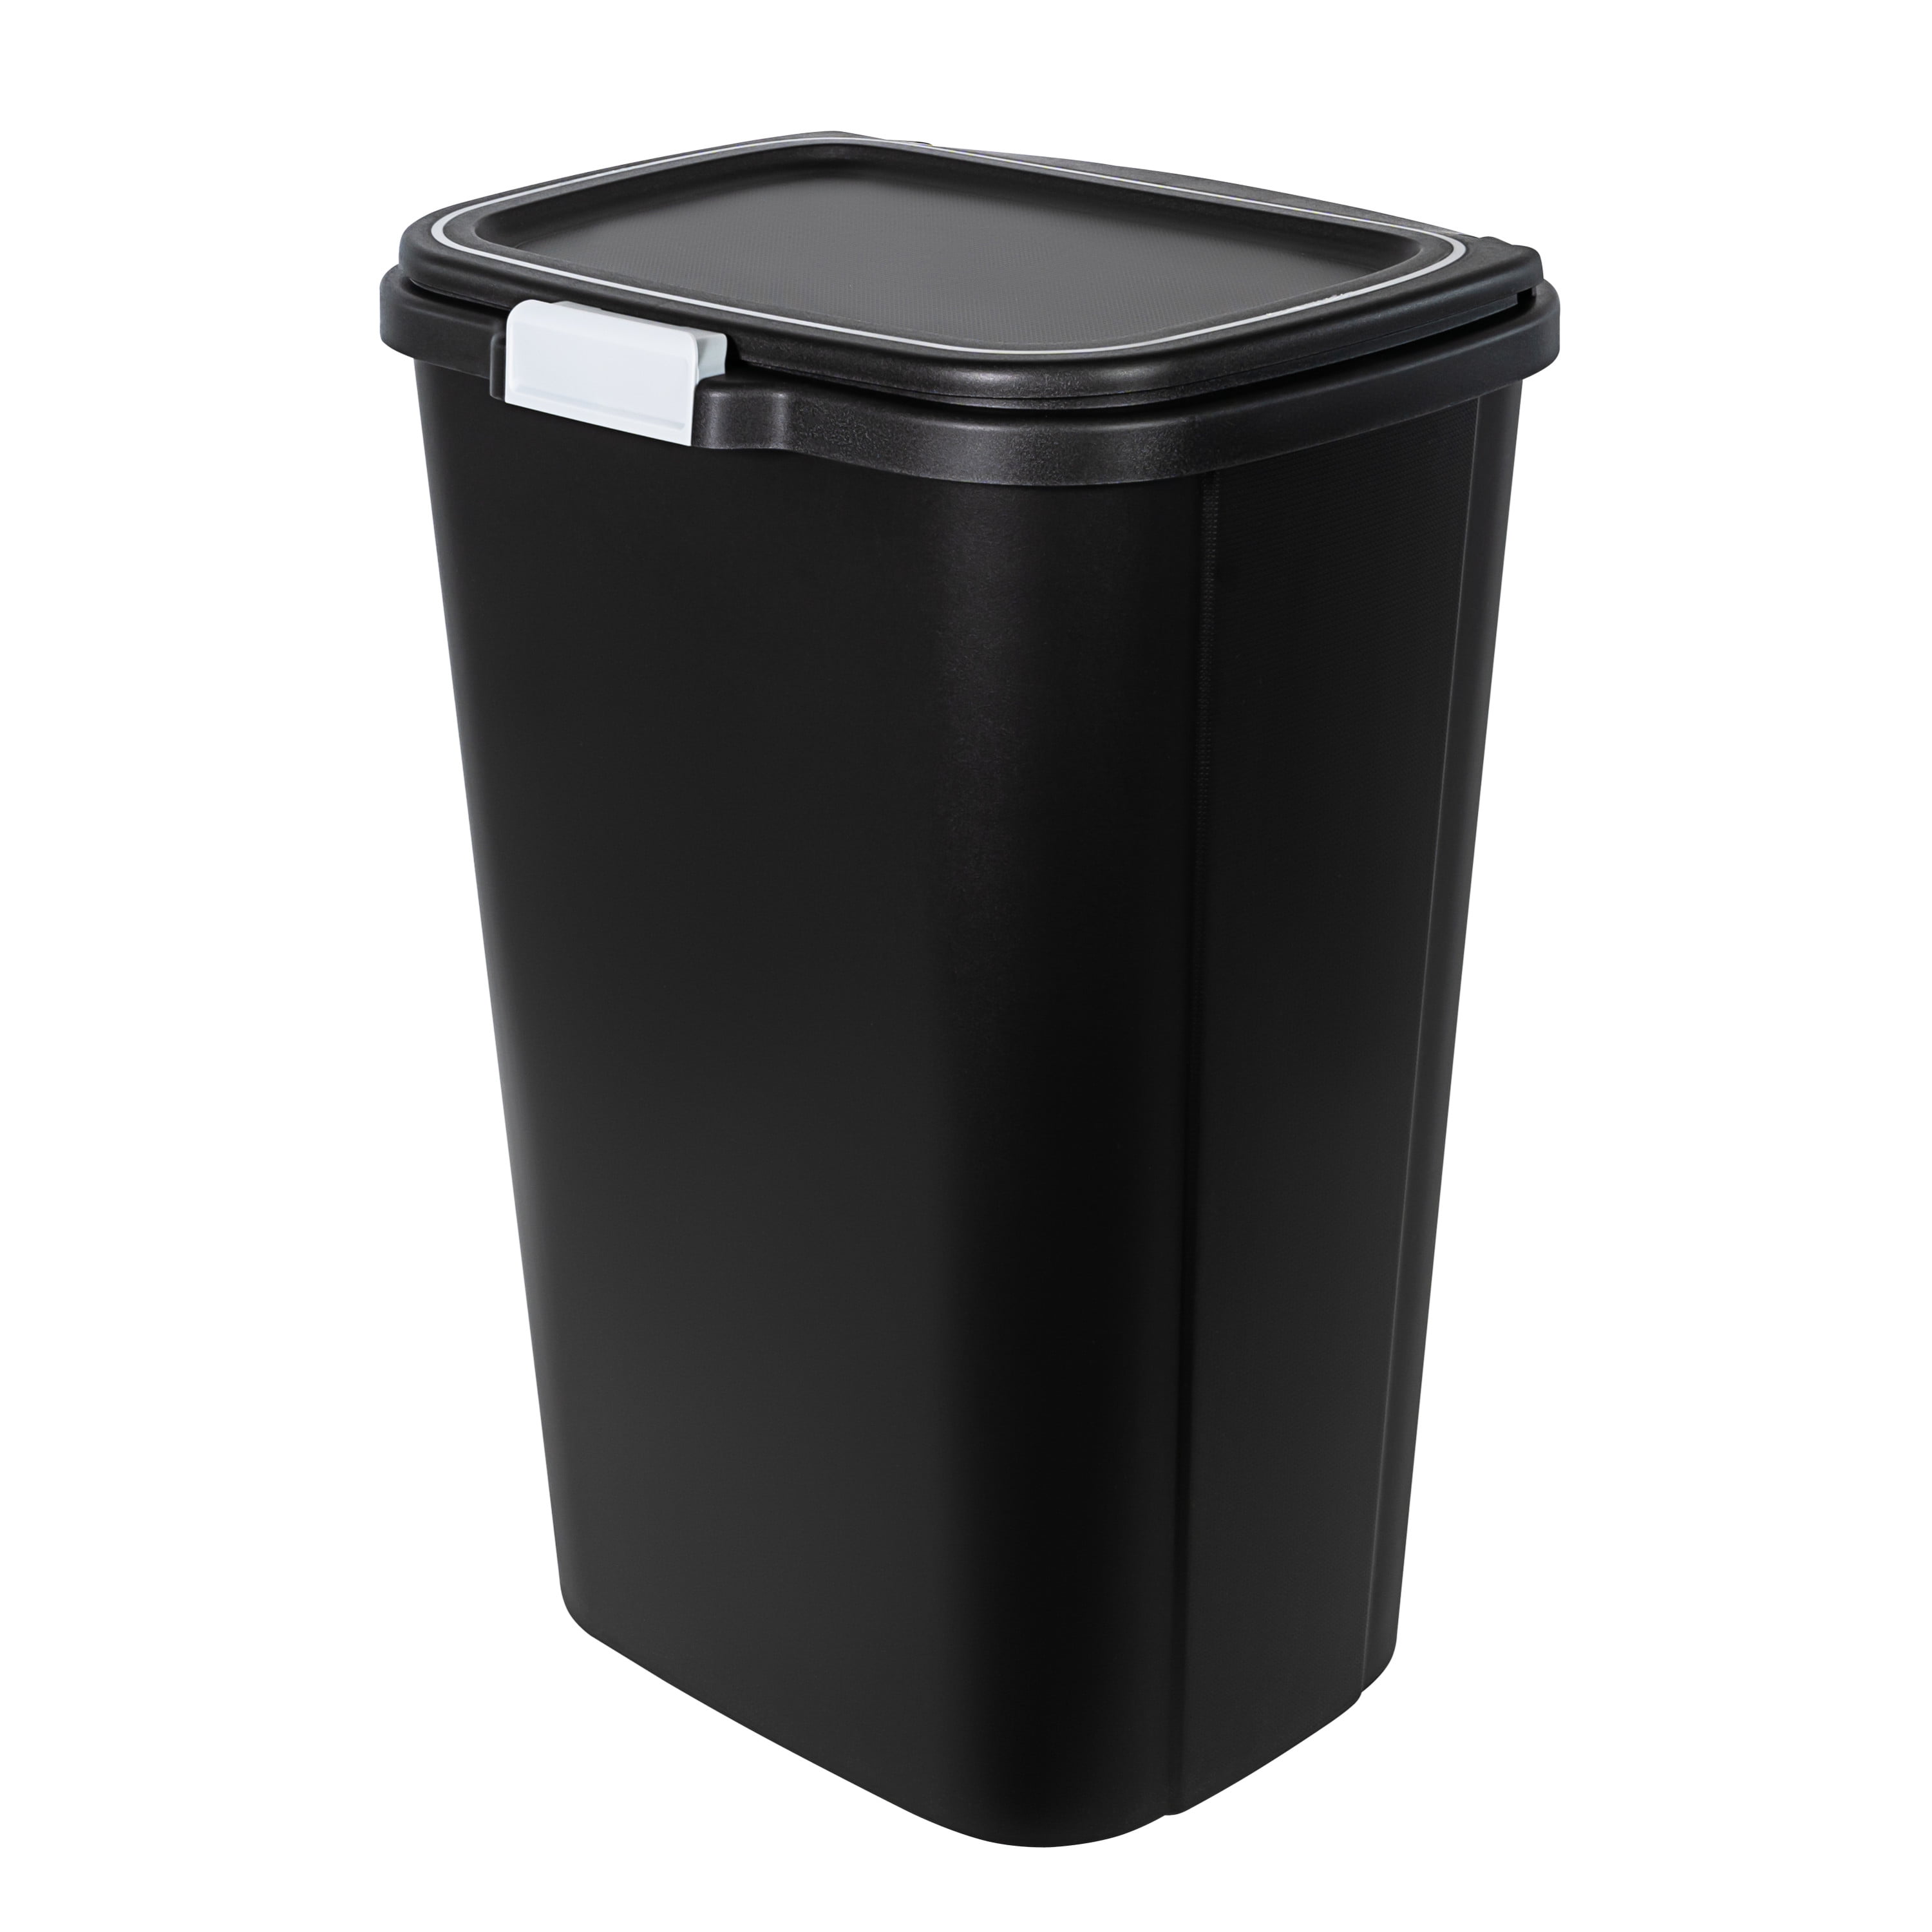 Halo 13-Gallon Round Open Top Trash Can with Dual AbsorbX Odor Filters